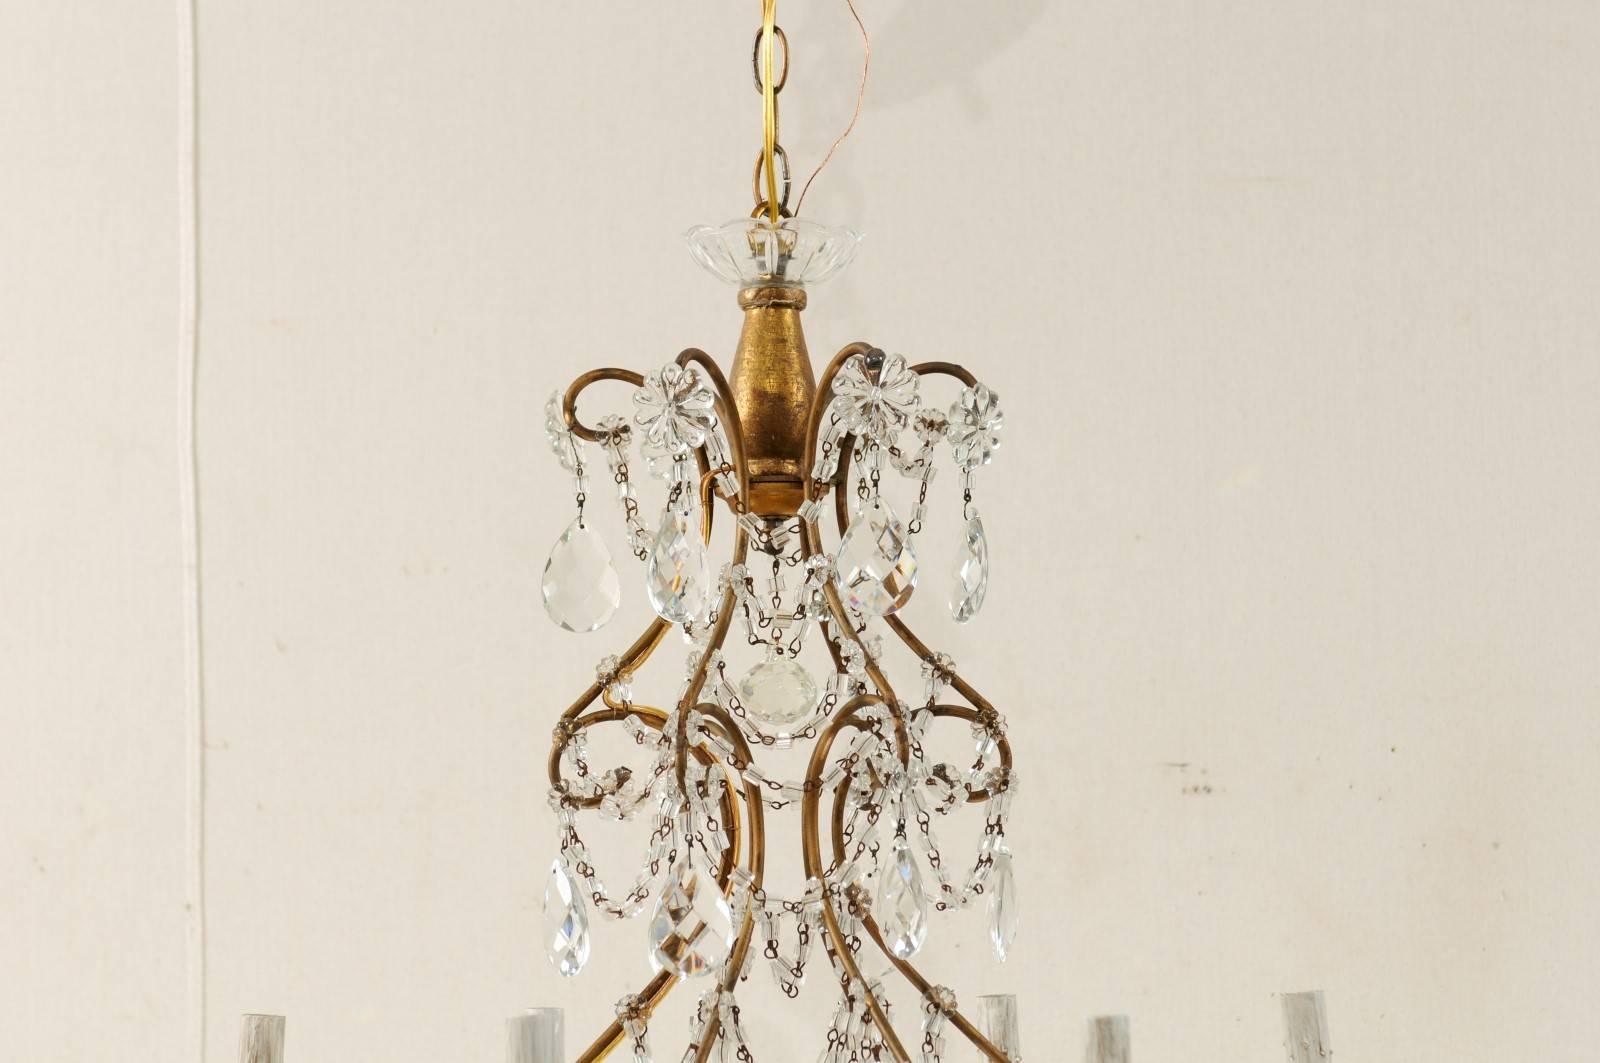 20th Century Pair of Italian Mid-Century Crystal Chandeliers with Six-Lights Each, Gold Hue